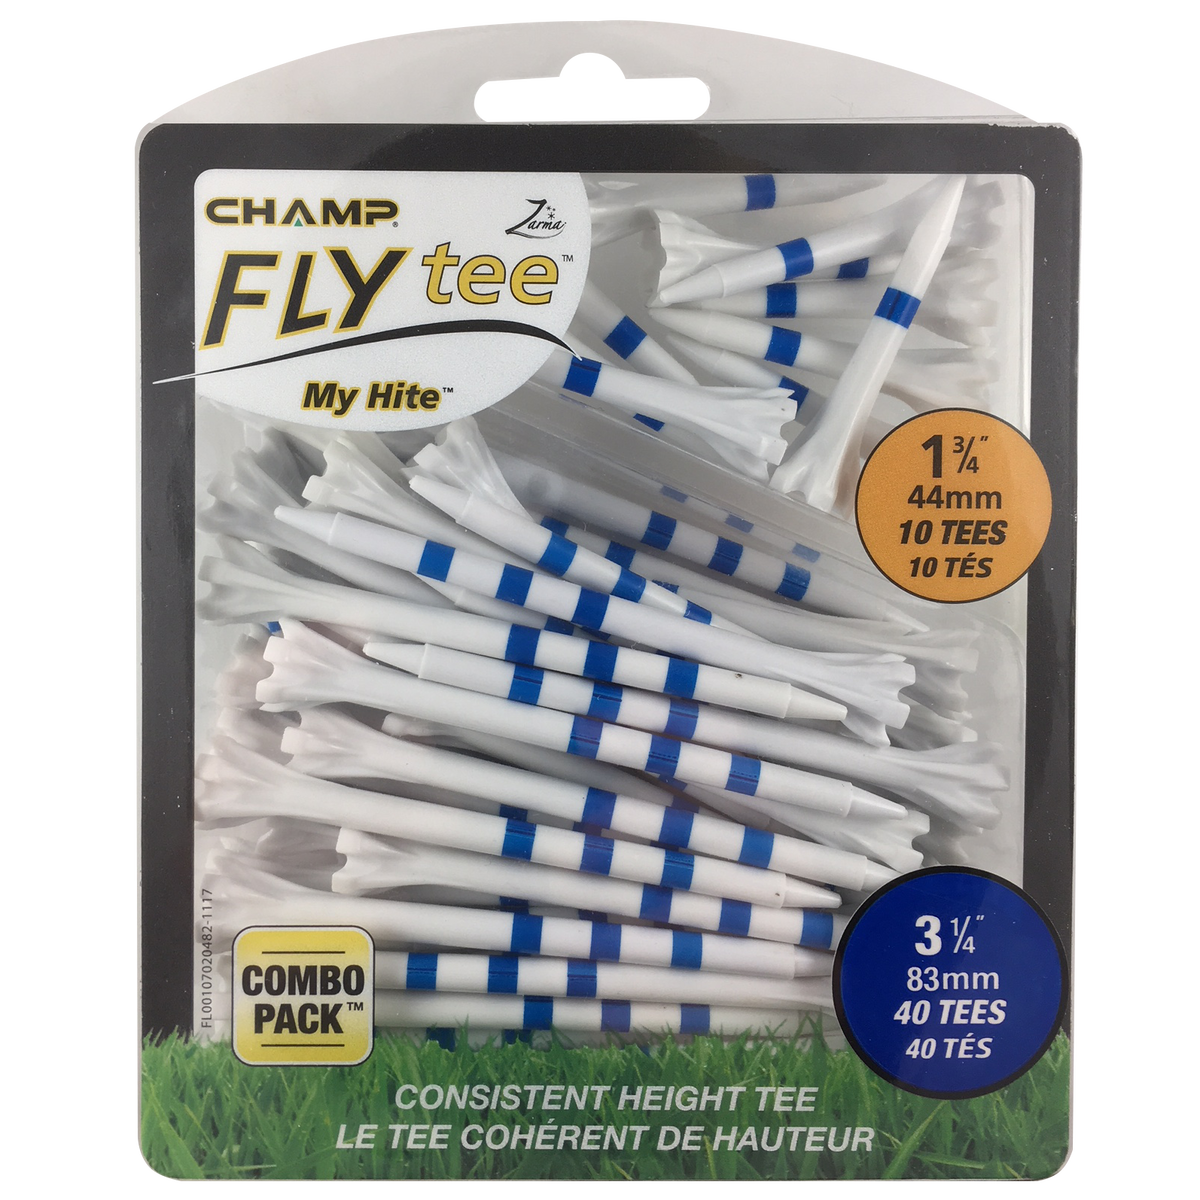 Champ Fly Tee 3-1/4″ & 1-3/4″ Combo Pack